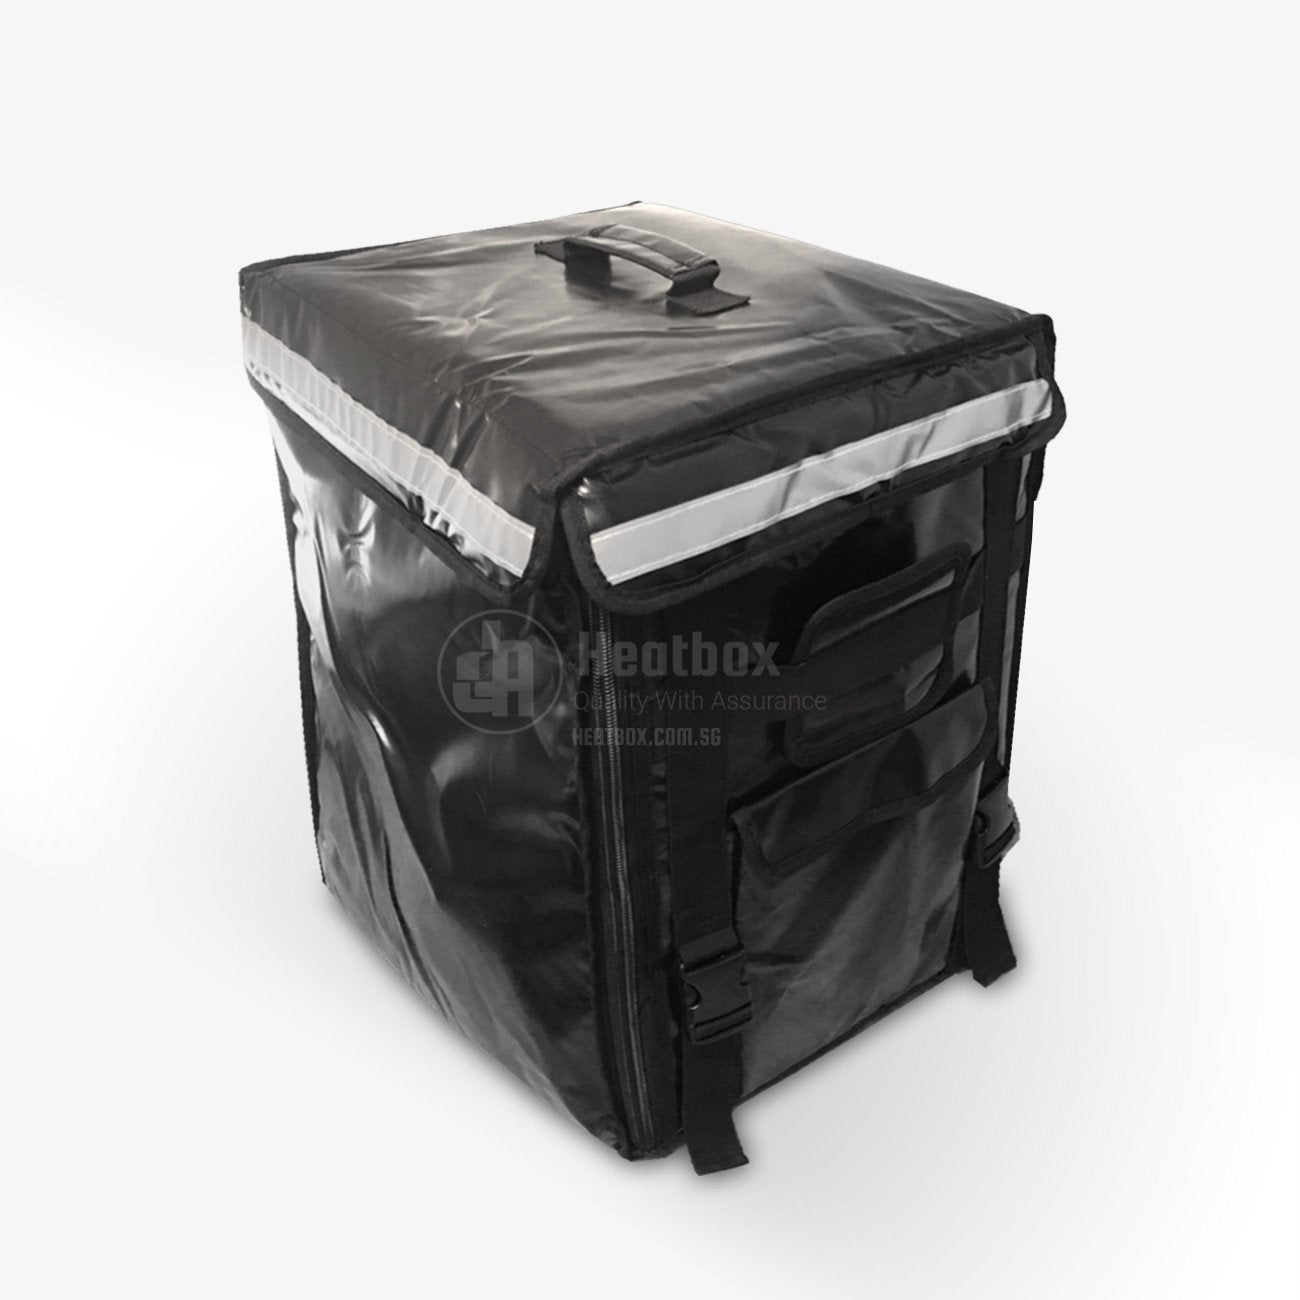 Performance Delivery Bags - Heatbox